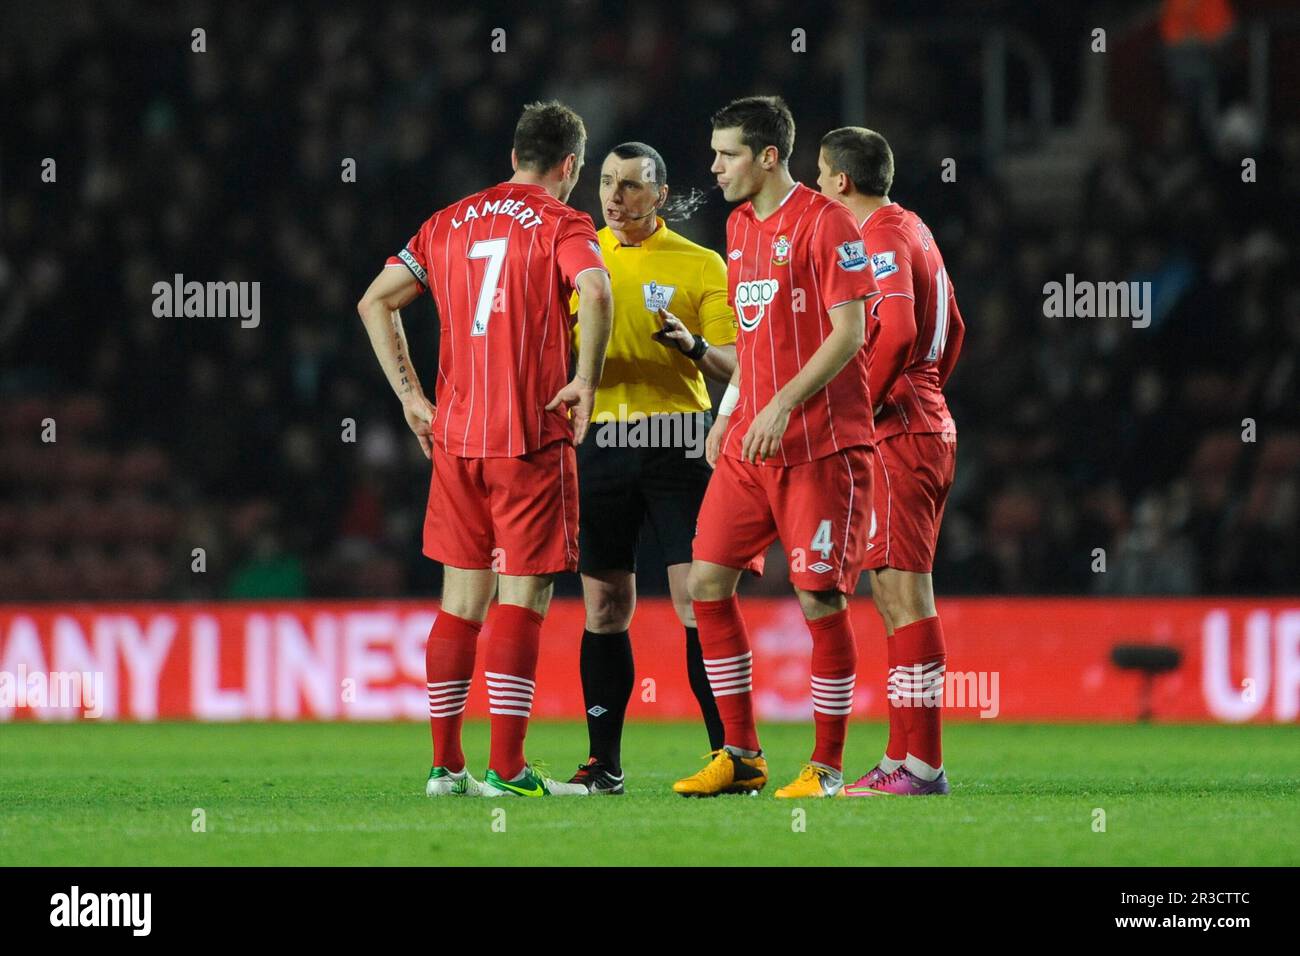 Referee Mr N Swarbrick has words with (L-R) Rickie Lambert, Morgan Schneiderlin and Gaston Ramirez of Southampton during the Barclays Premier League m Stock Photo